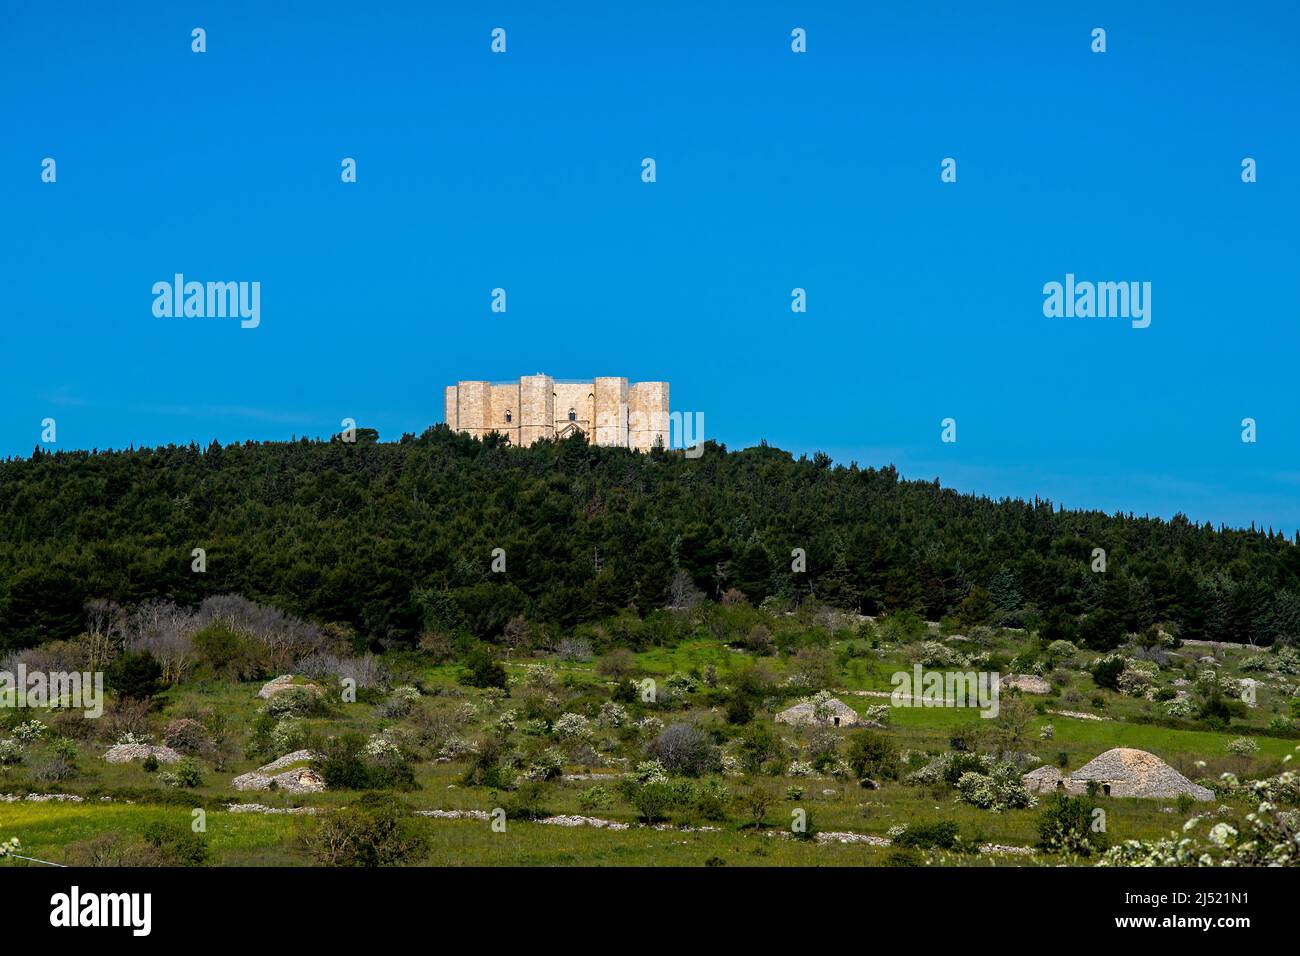 Castel del Monte is located on a hilltop in region of Apulia. South-eastern Italiy. Stock Photo